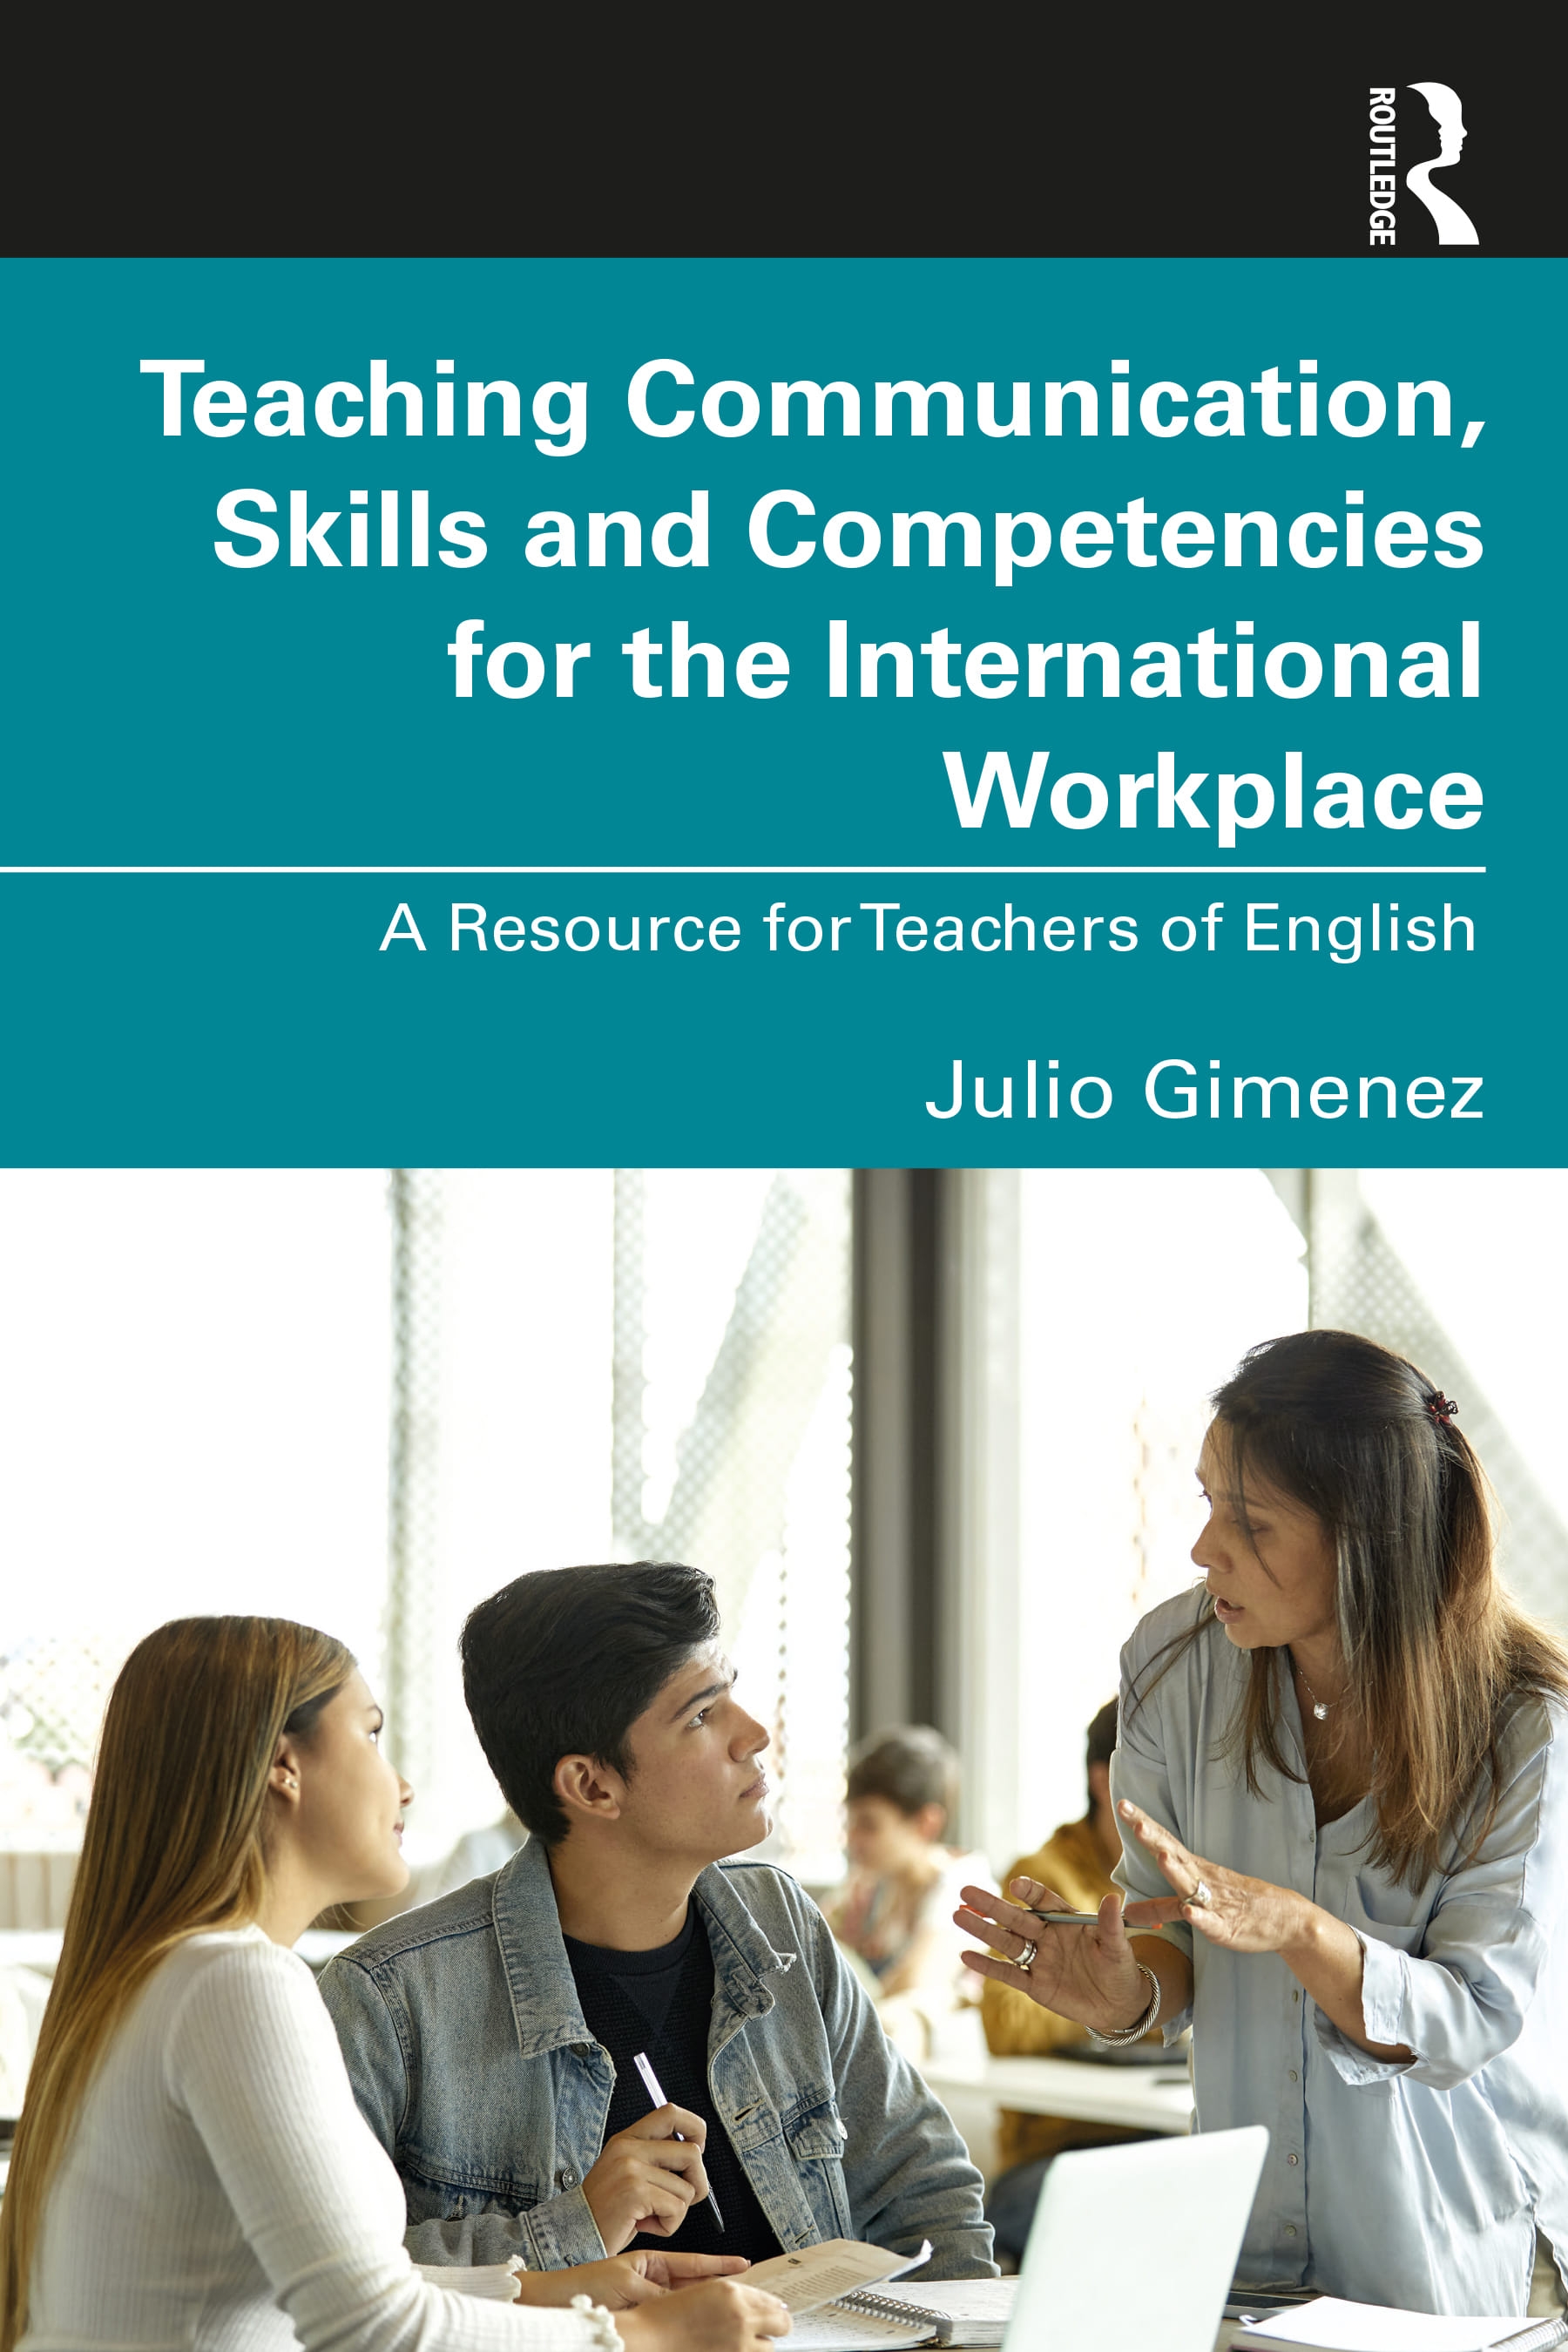 Teaching Communication, Skills and Competencies for the International Workplace: A Resource for Teachers of English